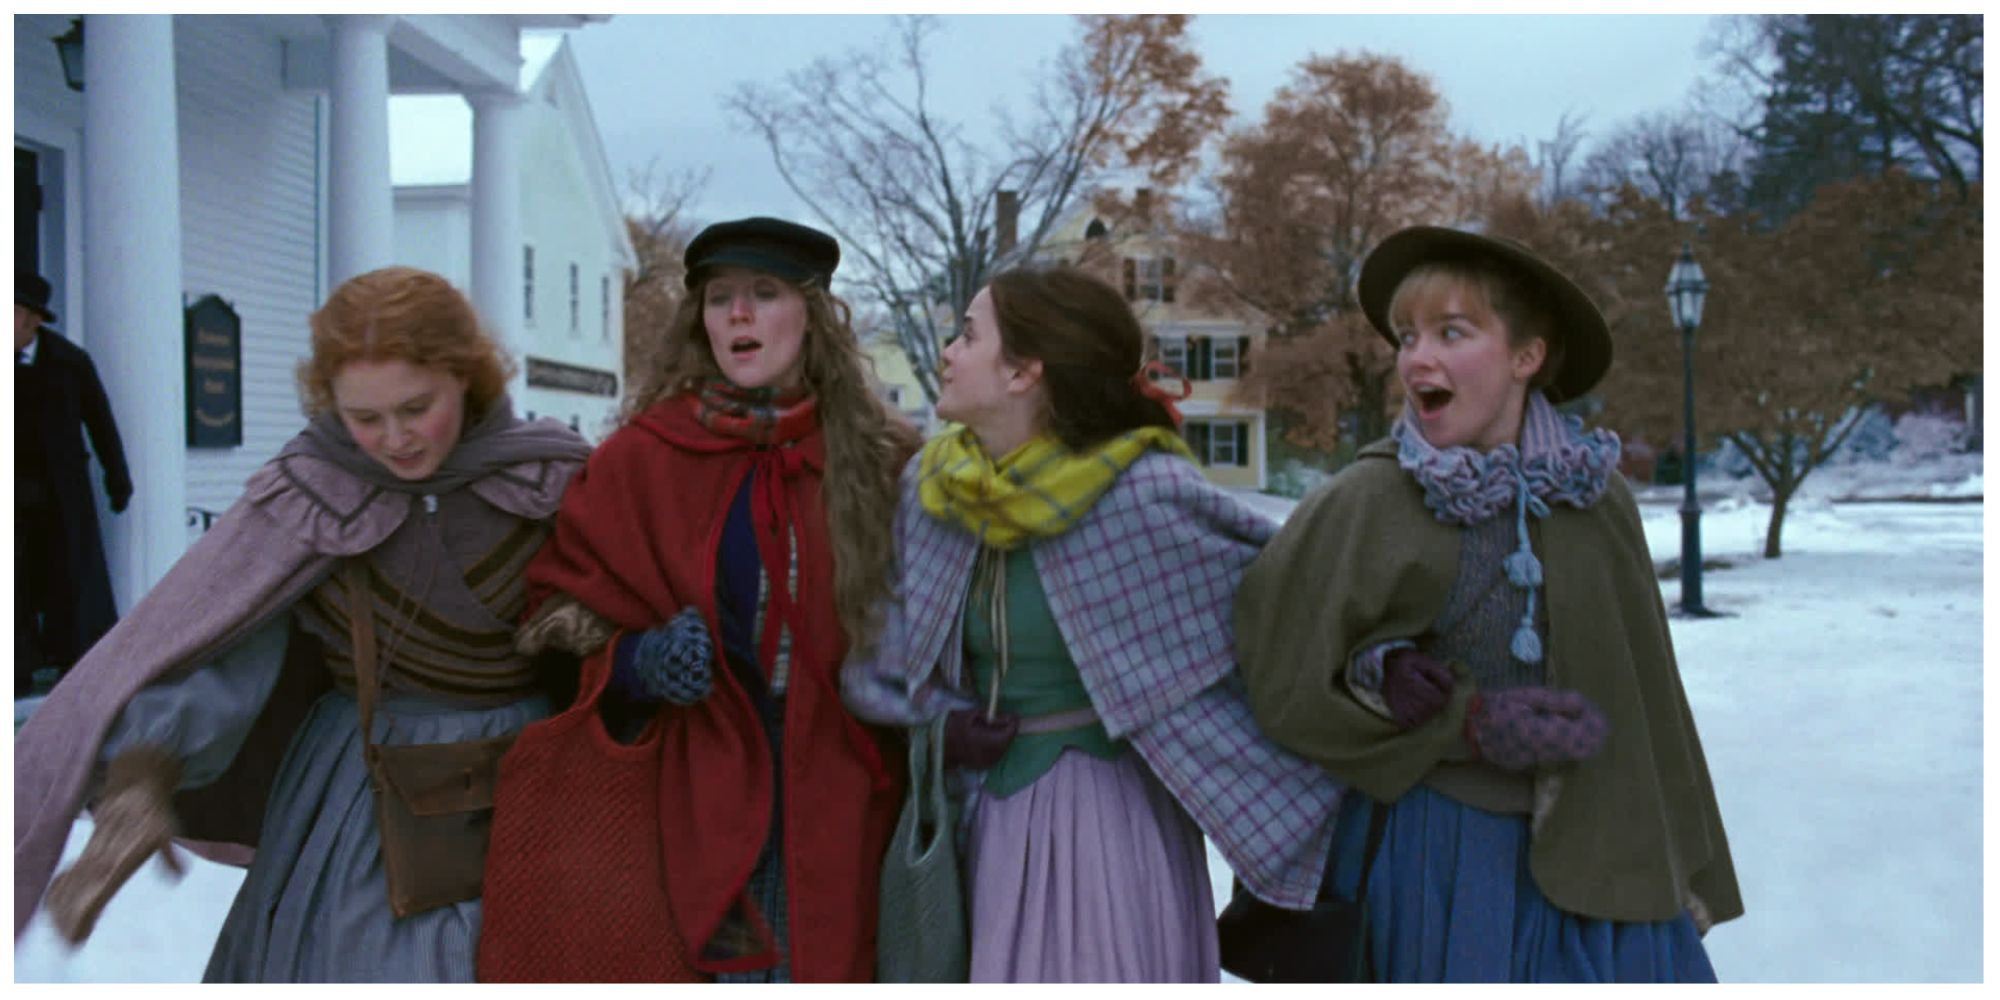 From left to right: Eliza Scanlen as Beth, Saoirse Ronan as Jo, Emma Watson as Meg and Florence Pugh as Amy walking together in Little Women.